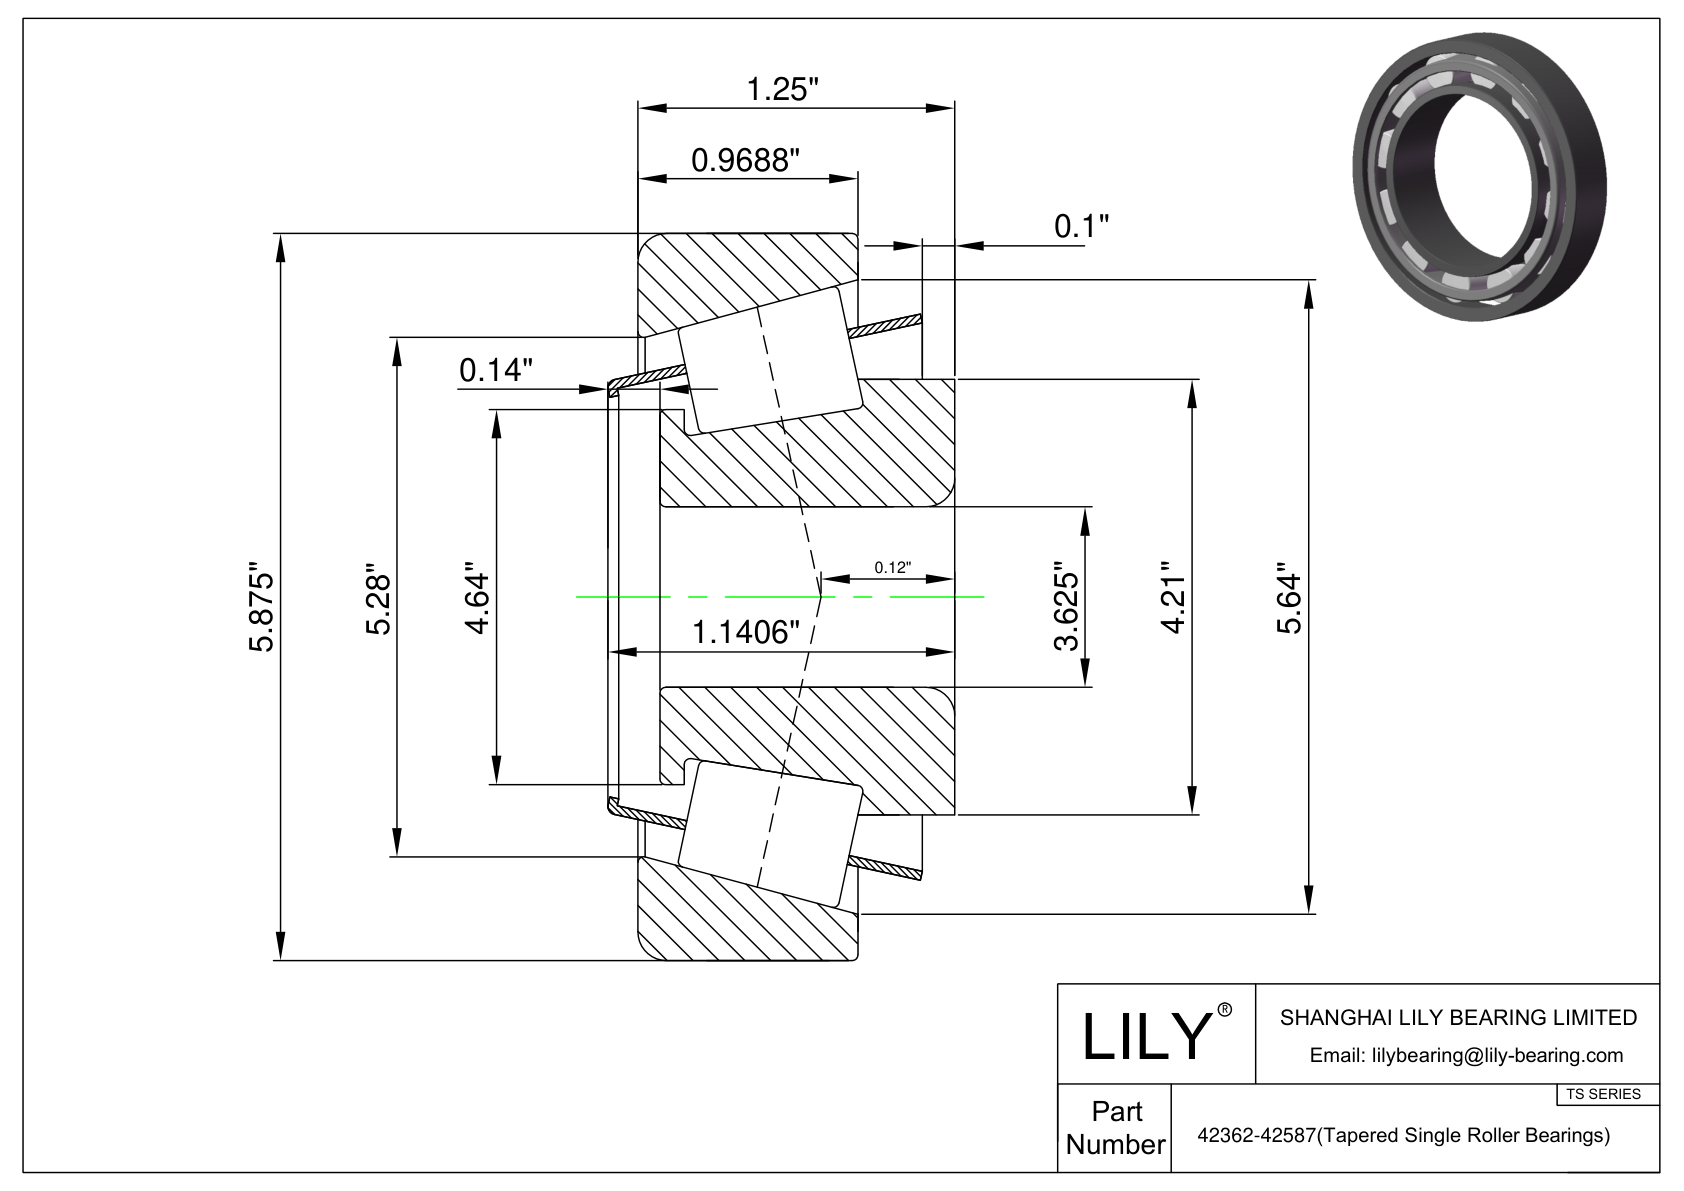 42362-42587 TS (Tapered Single Roller Bearings) (Imperial) cad drawing